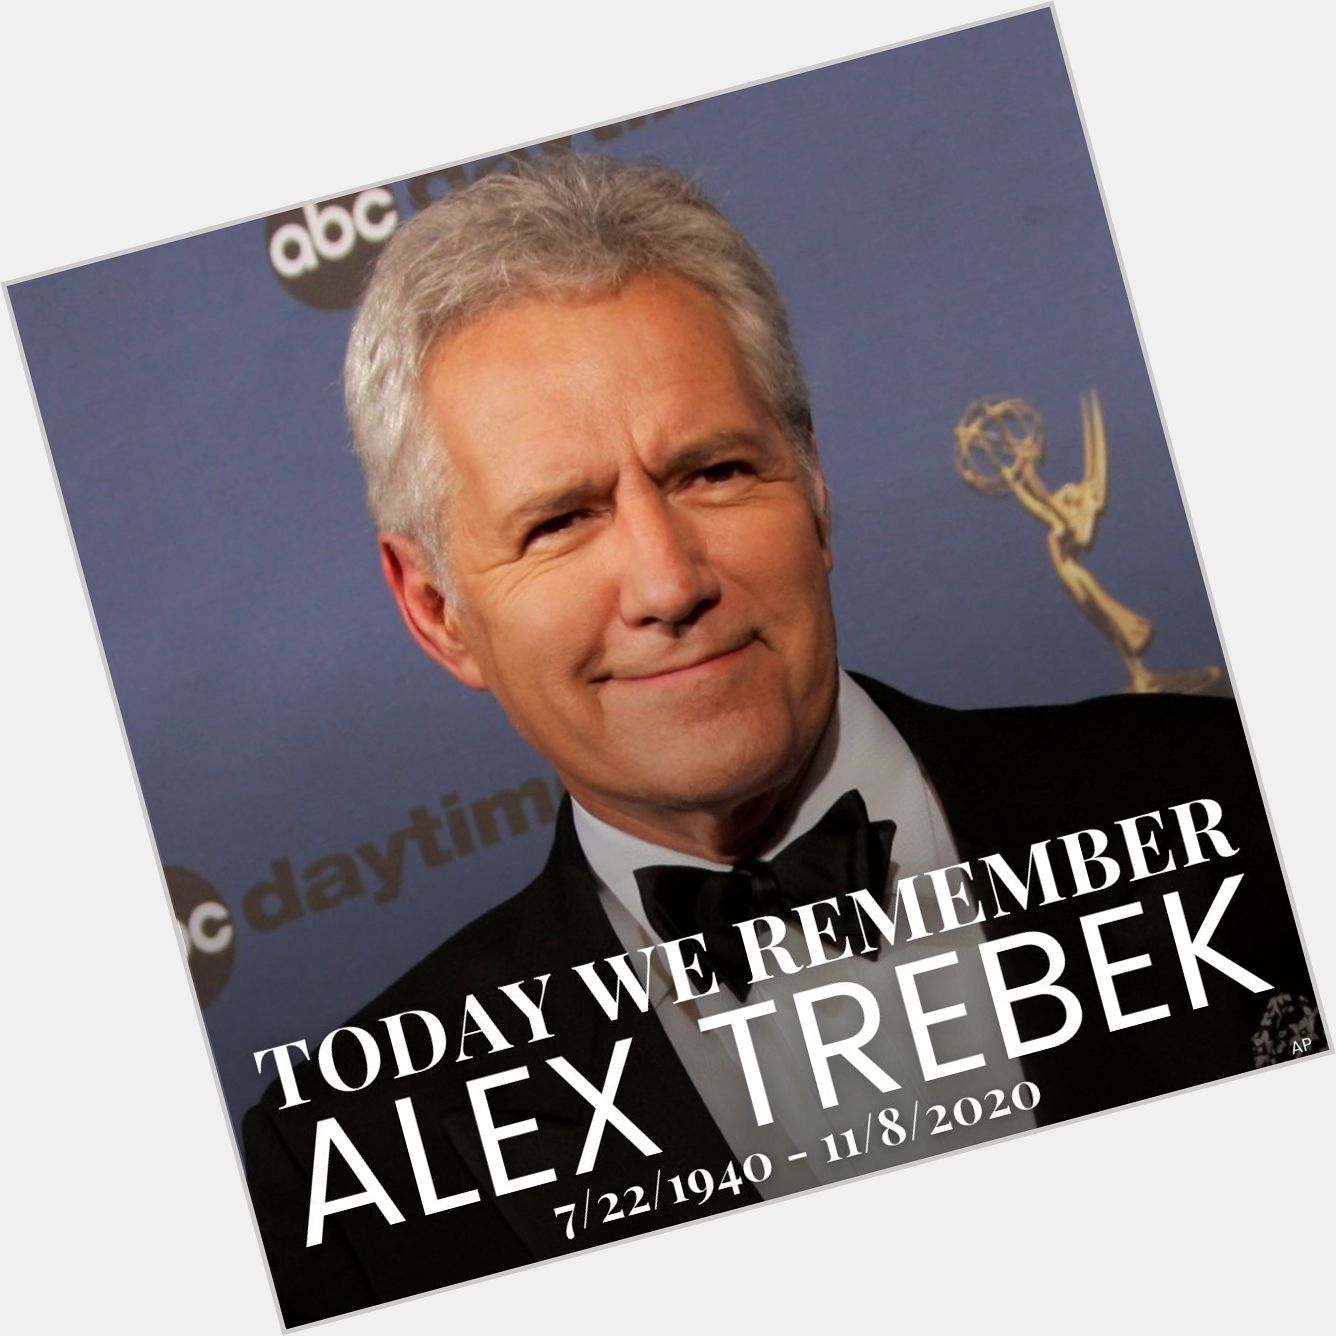 Happy Birthday, Alex Trebek! The legendary Jeopardy! host would have been 82 today. 